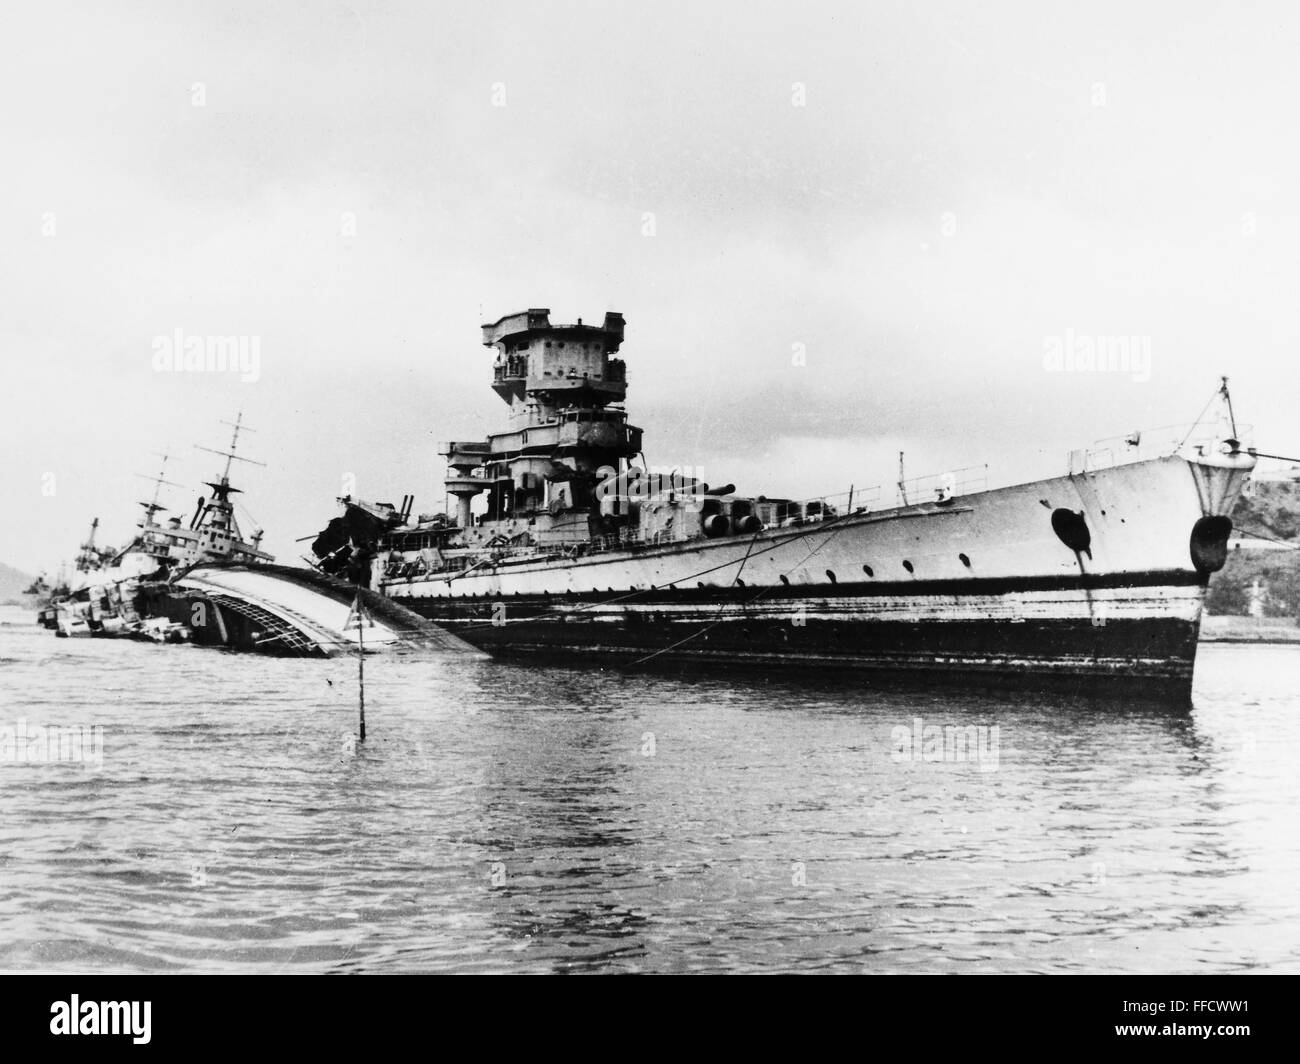 WORLD WAR II: FRENCH FLEET. /nRemnants of the French naval fleet scuttled during the German occupation and laying in the harbor at Toulon, France. Photographed 1943. Stock Photo